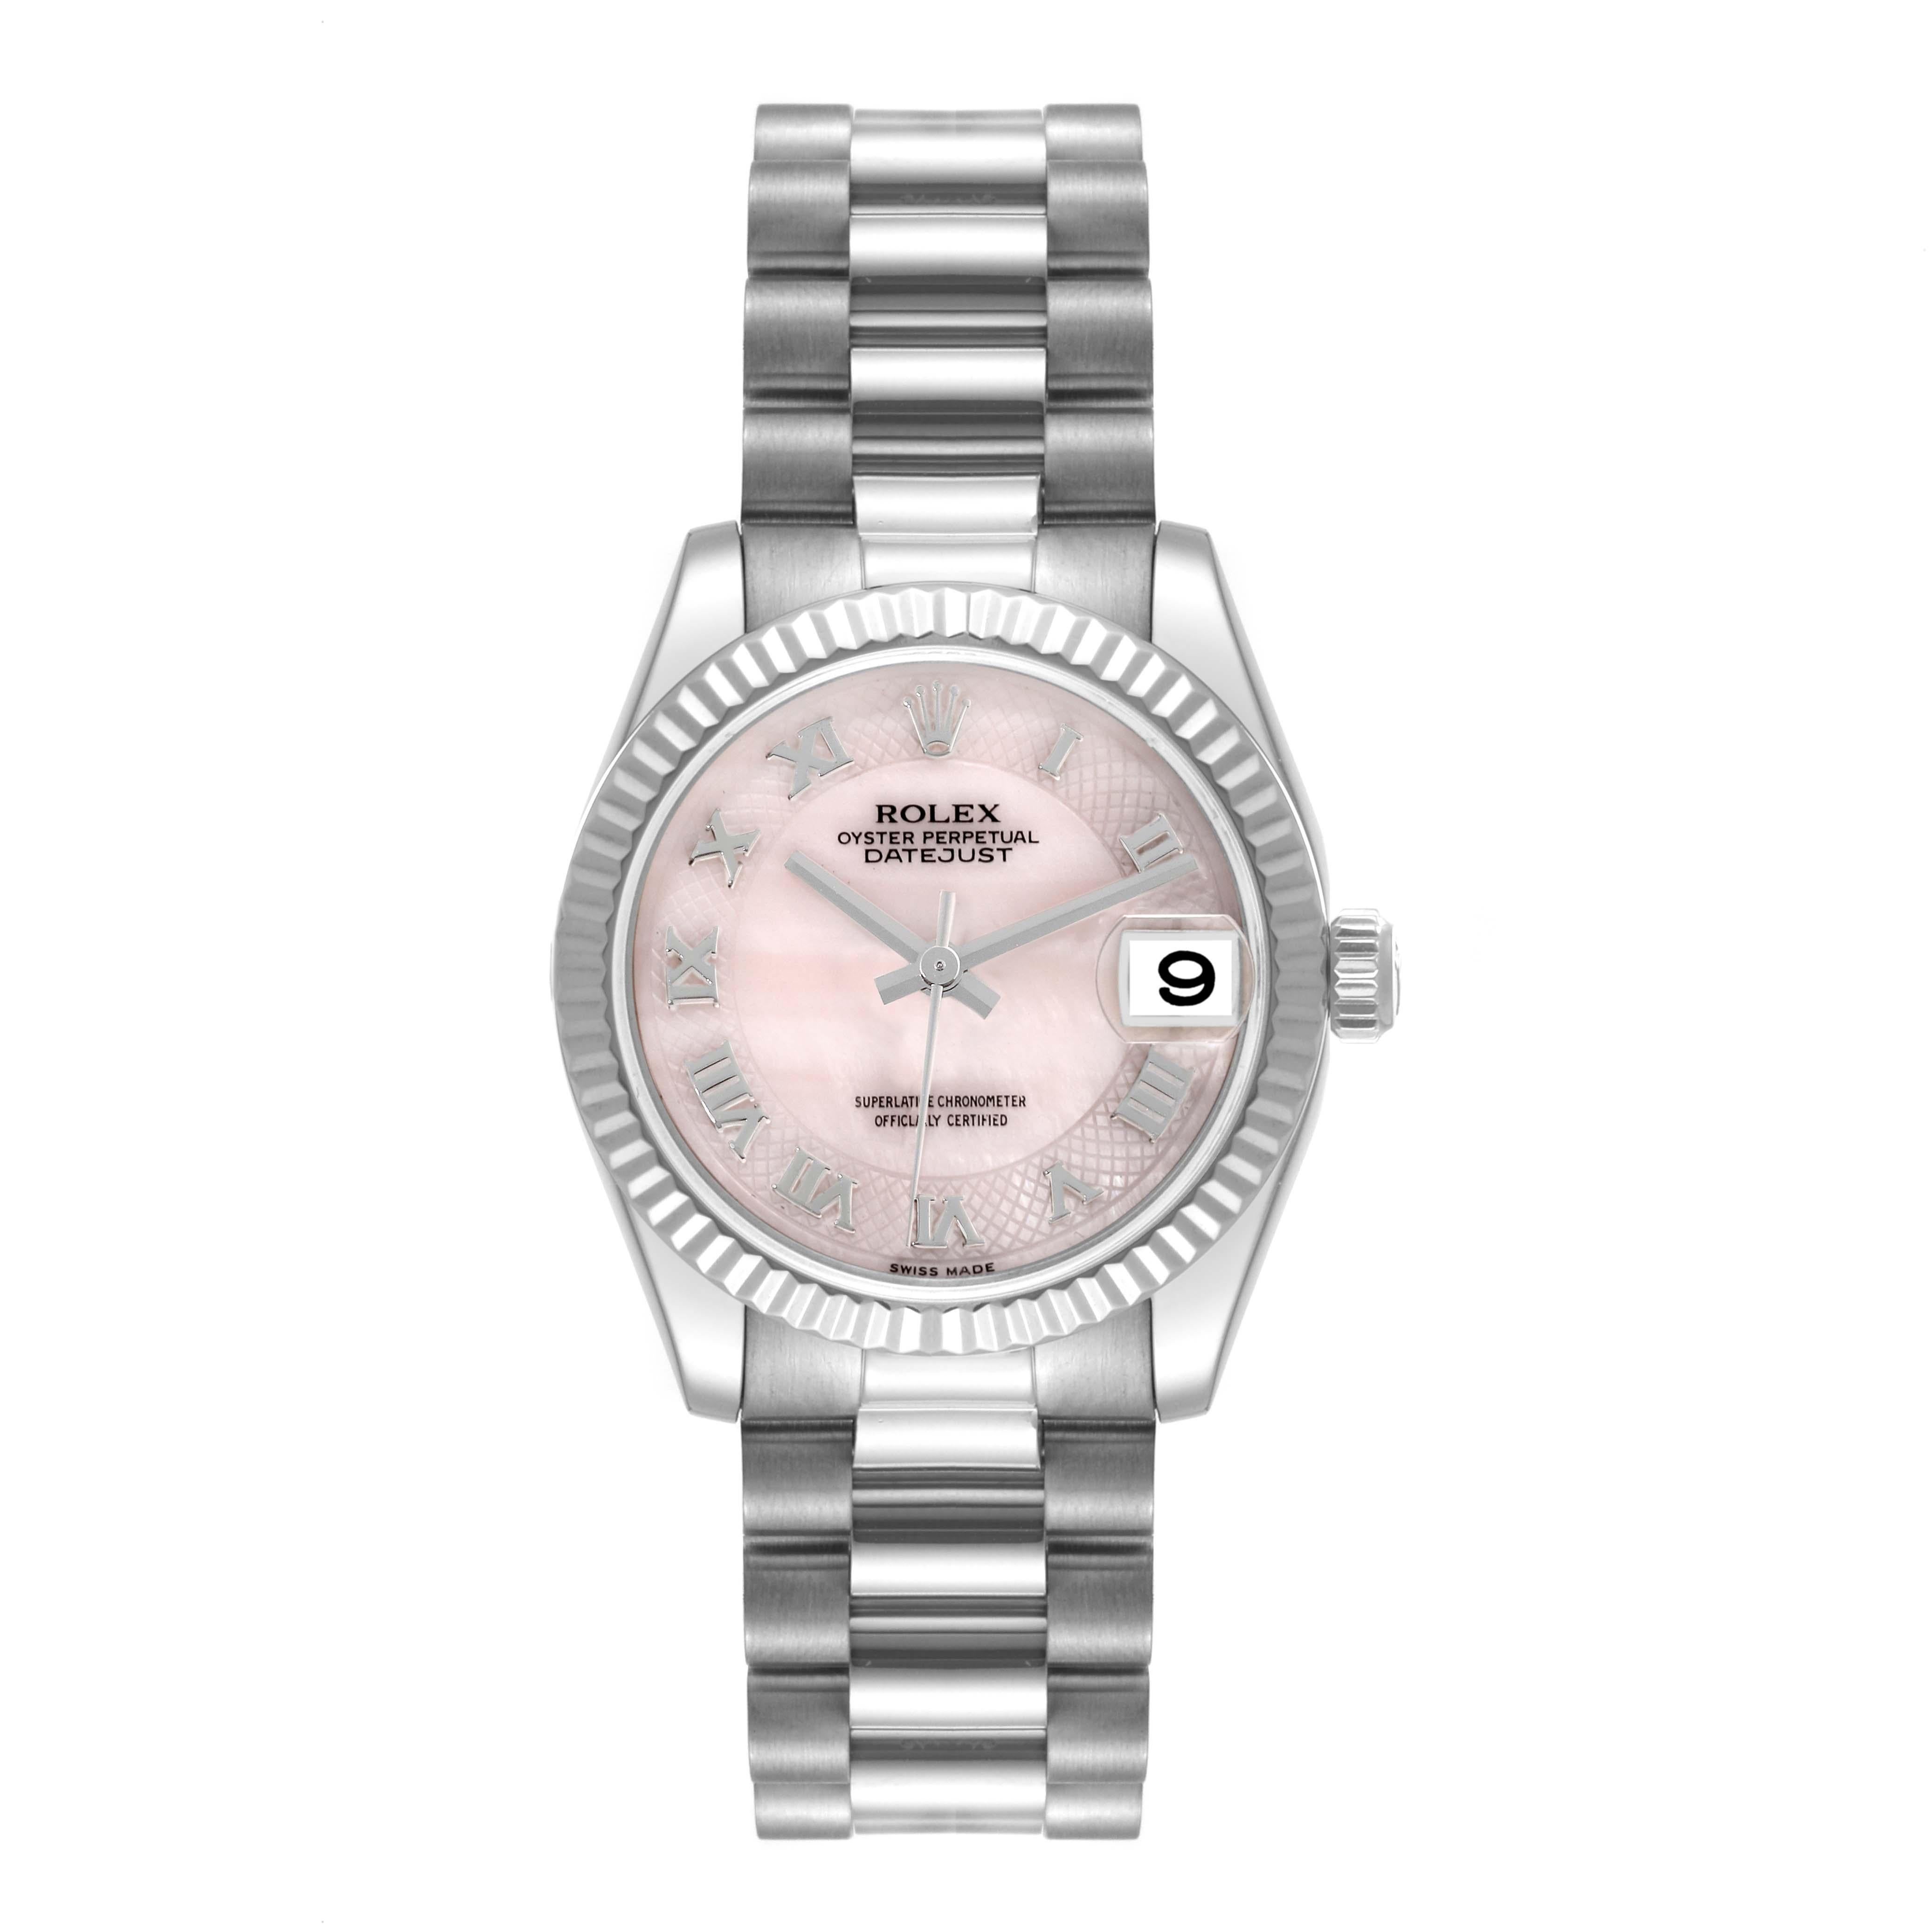 Rolex President Midsize White Gold Mother of Pearl Dial Ladies Watch 178279. Officially certified chronometer self-winding movement. 18k white gold oyster case 31.0 mm in diameter. Rolex logo on a crown. 18k white gold fluted bezel. Scratch